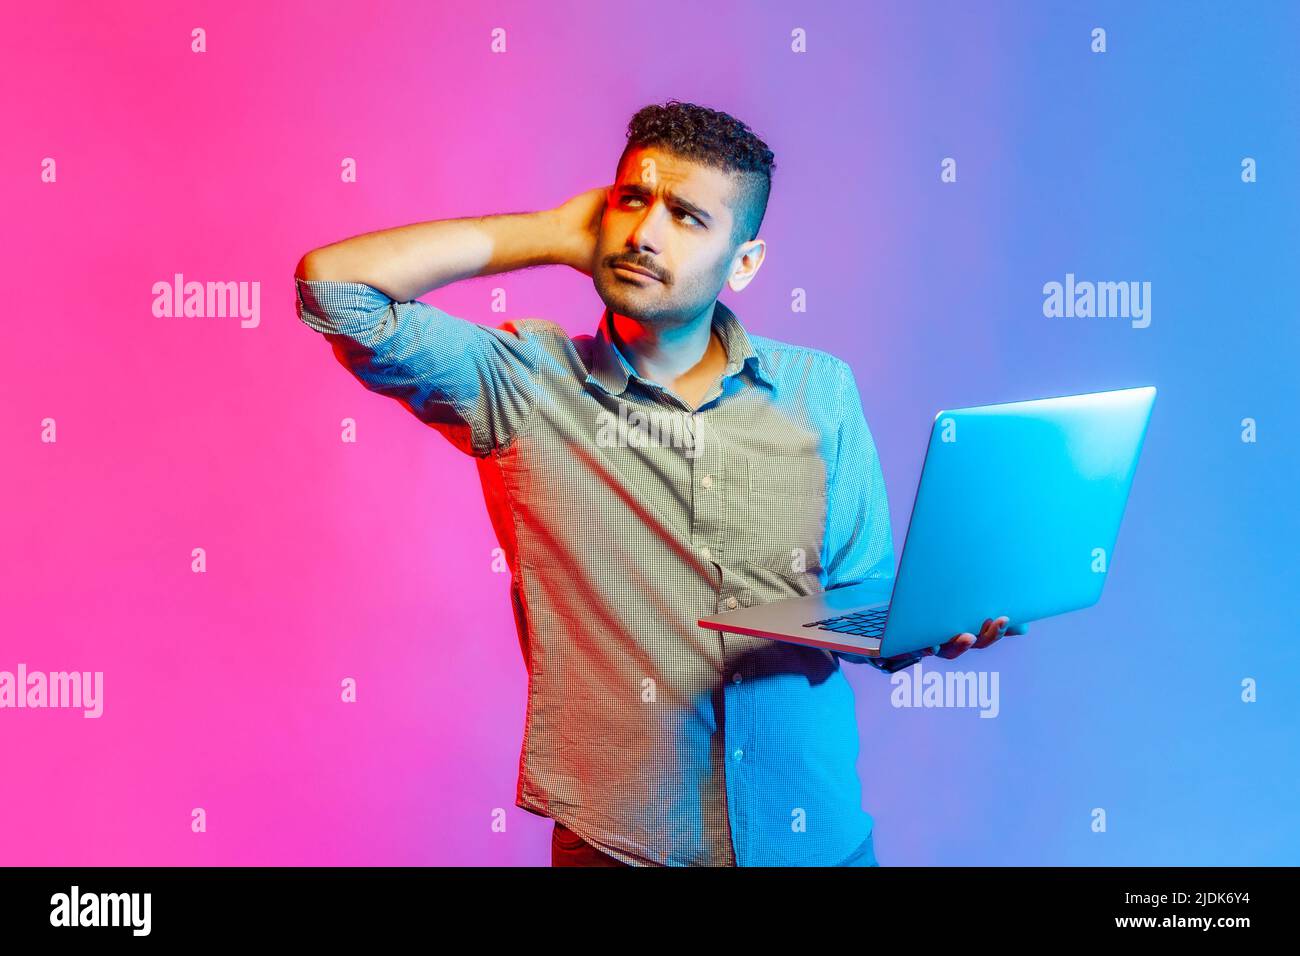 Portrait of handsome pensive man in shirt holding laptop and rubbing head looking away, thinking over new business project. Indoor studio shot isolated on colorful neon light background. Stock Photo